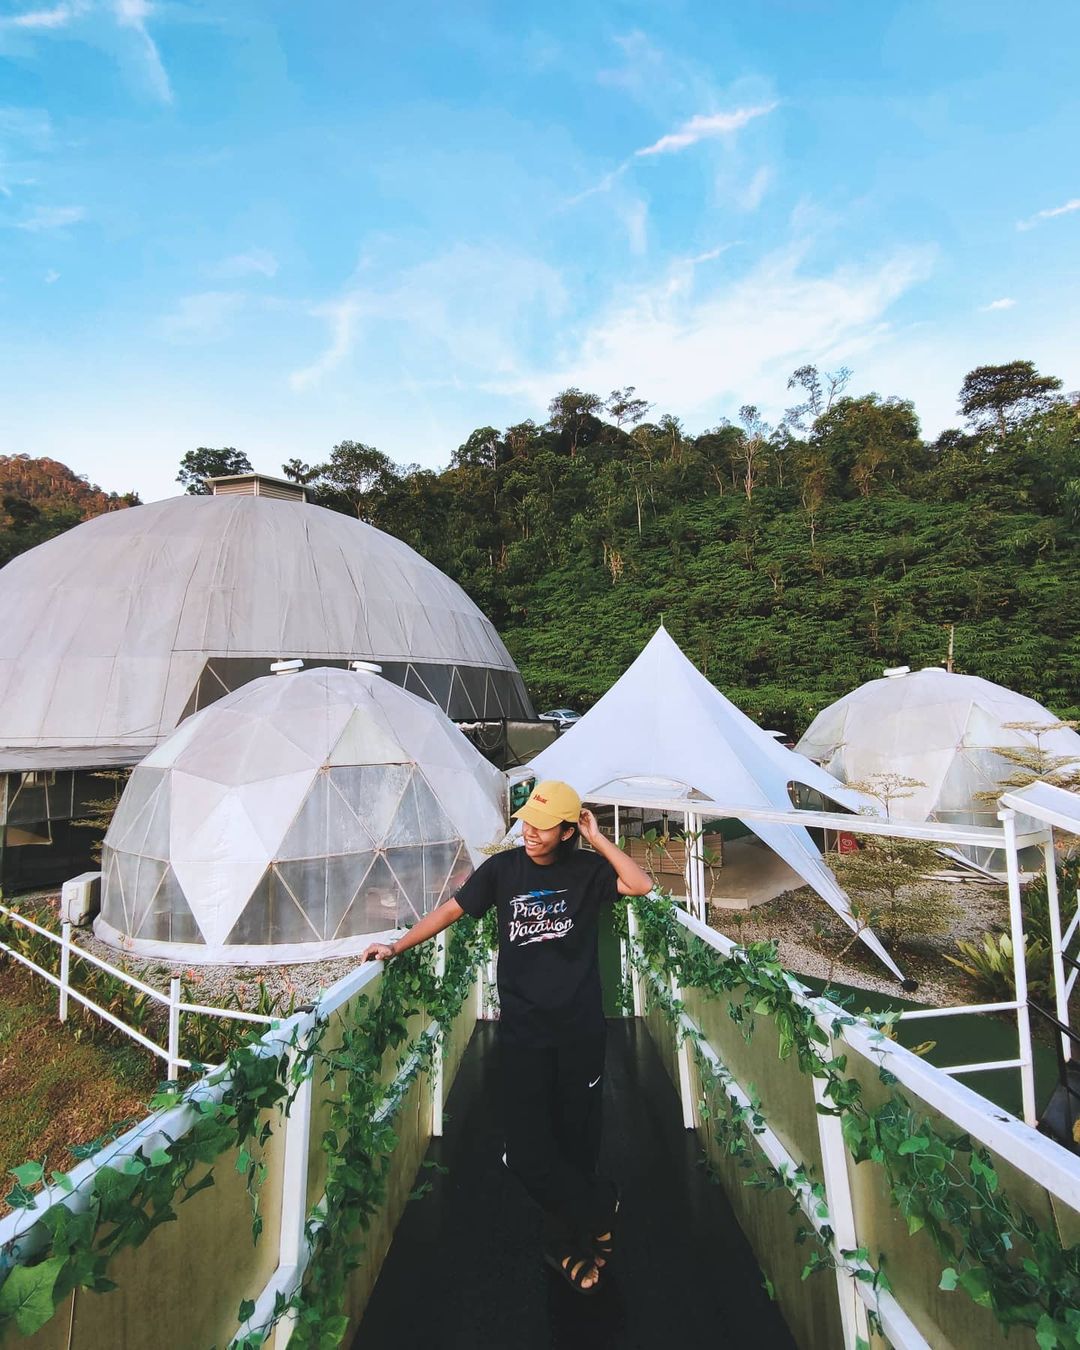 Glamping spots in and near KL - Glamz exterior